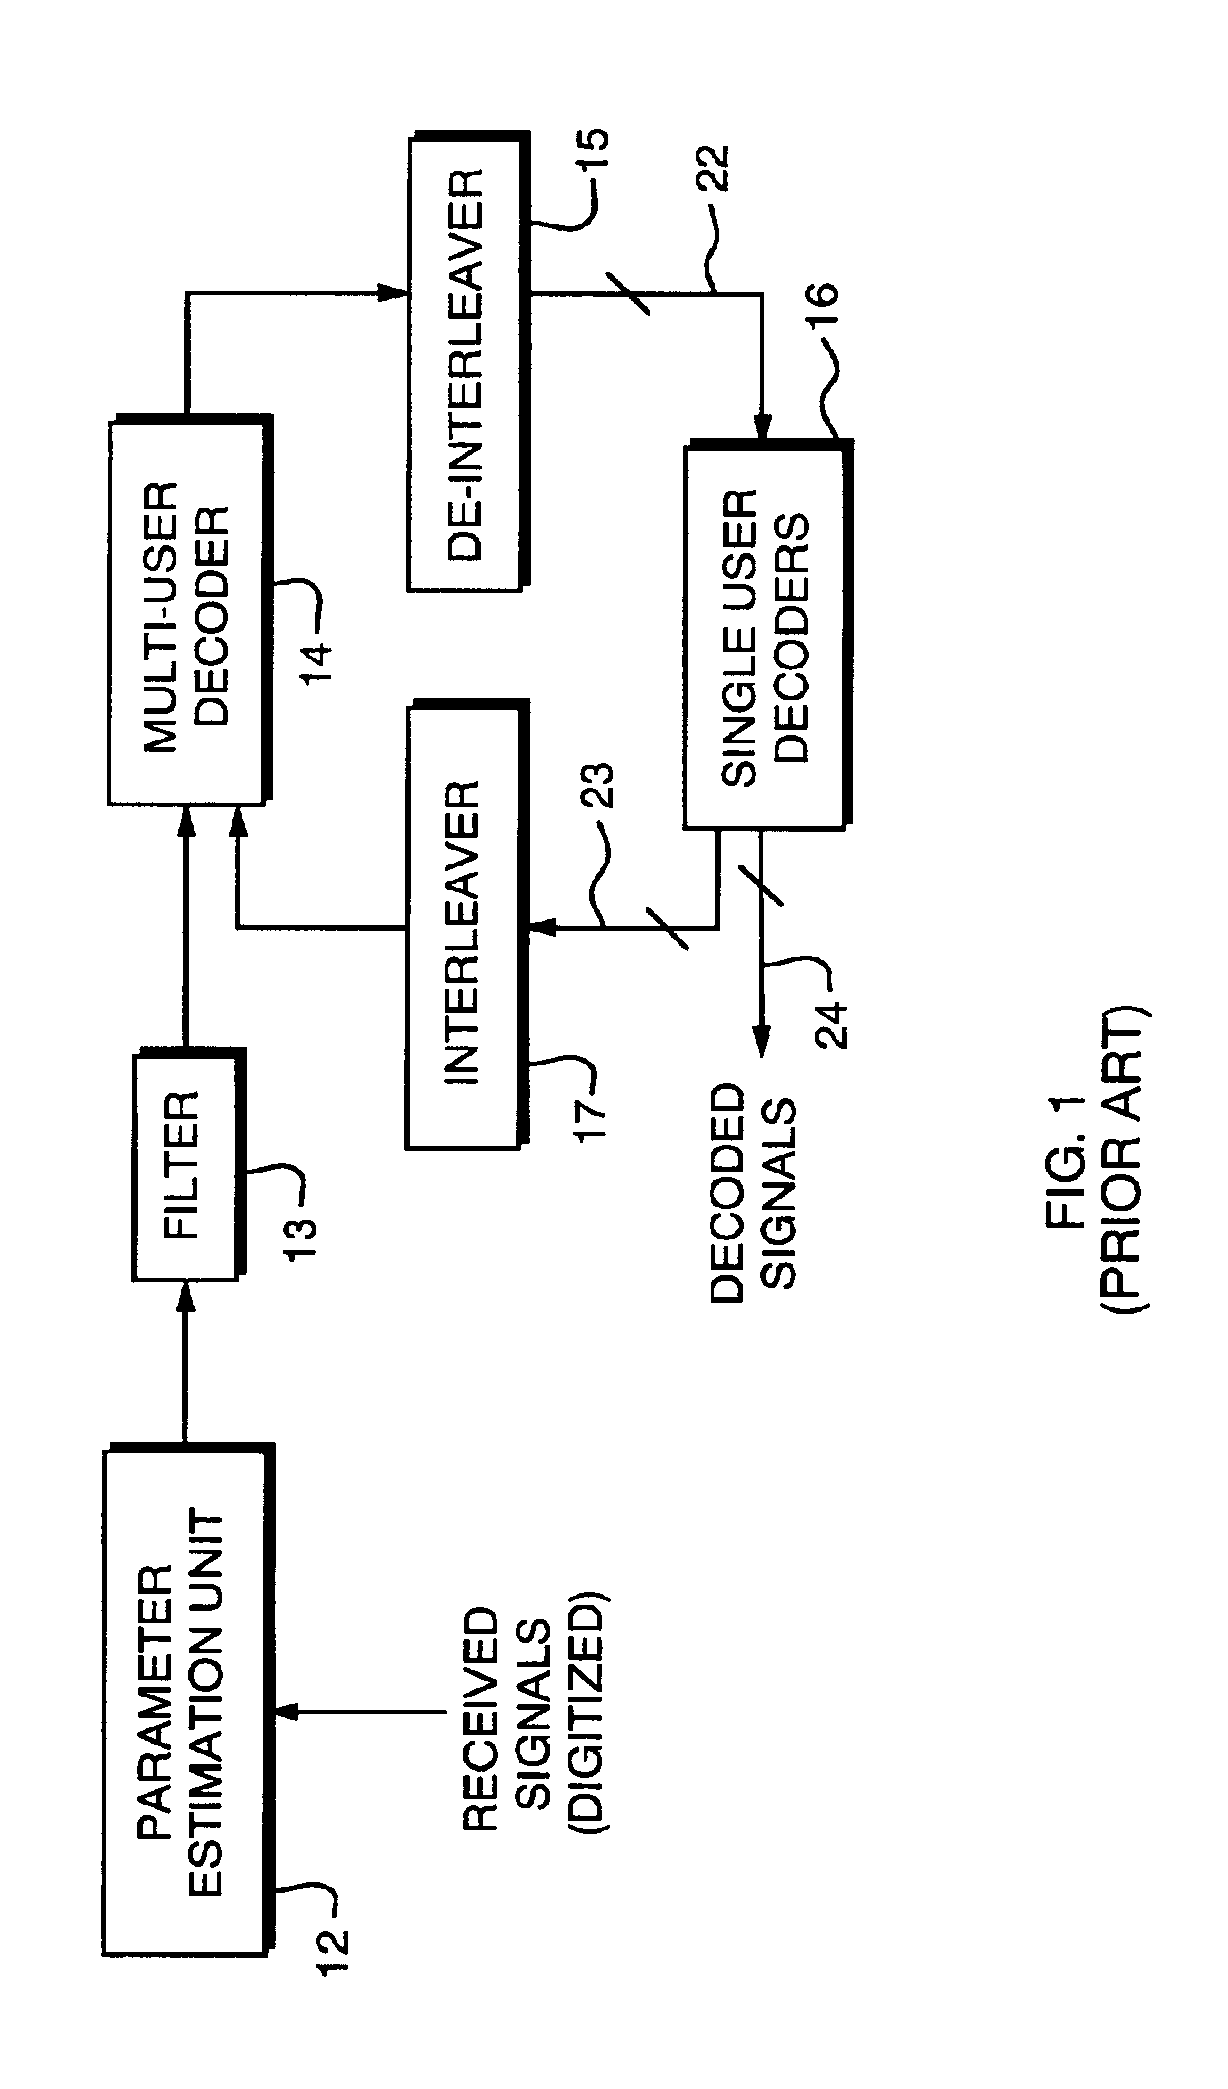 Method and apparatus for improved turbo multiuser detector